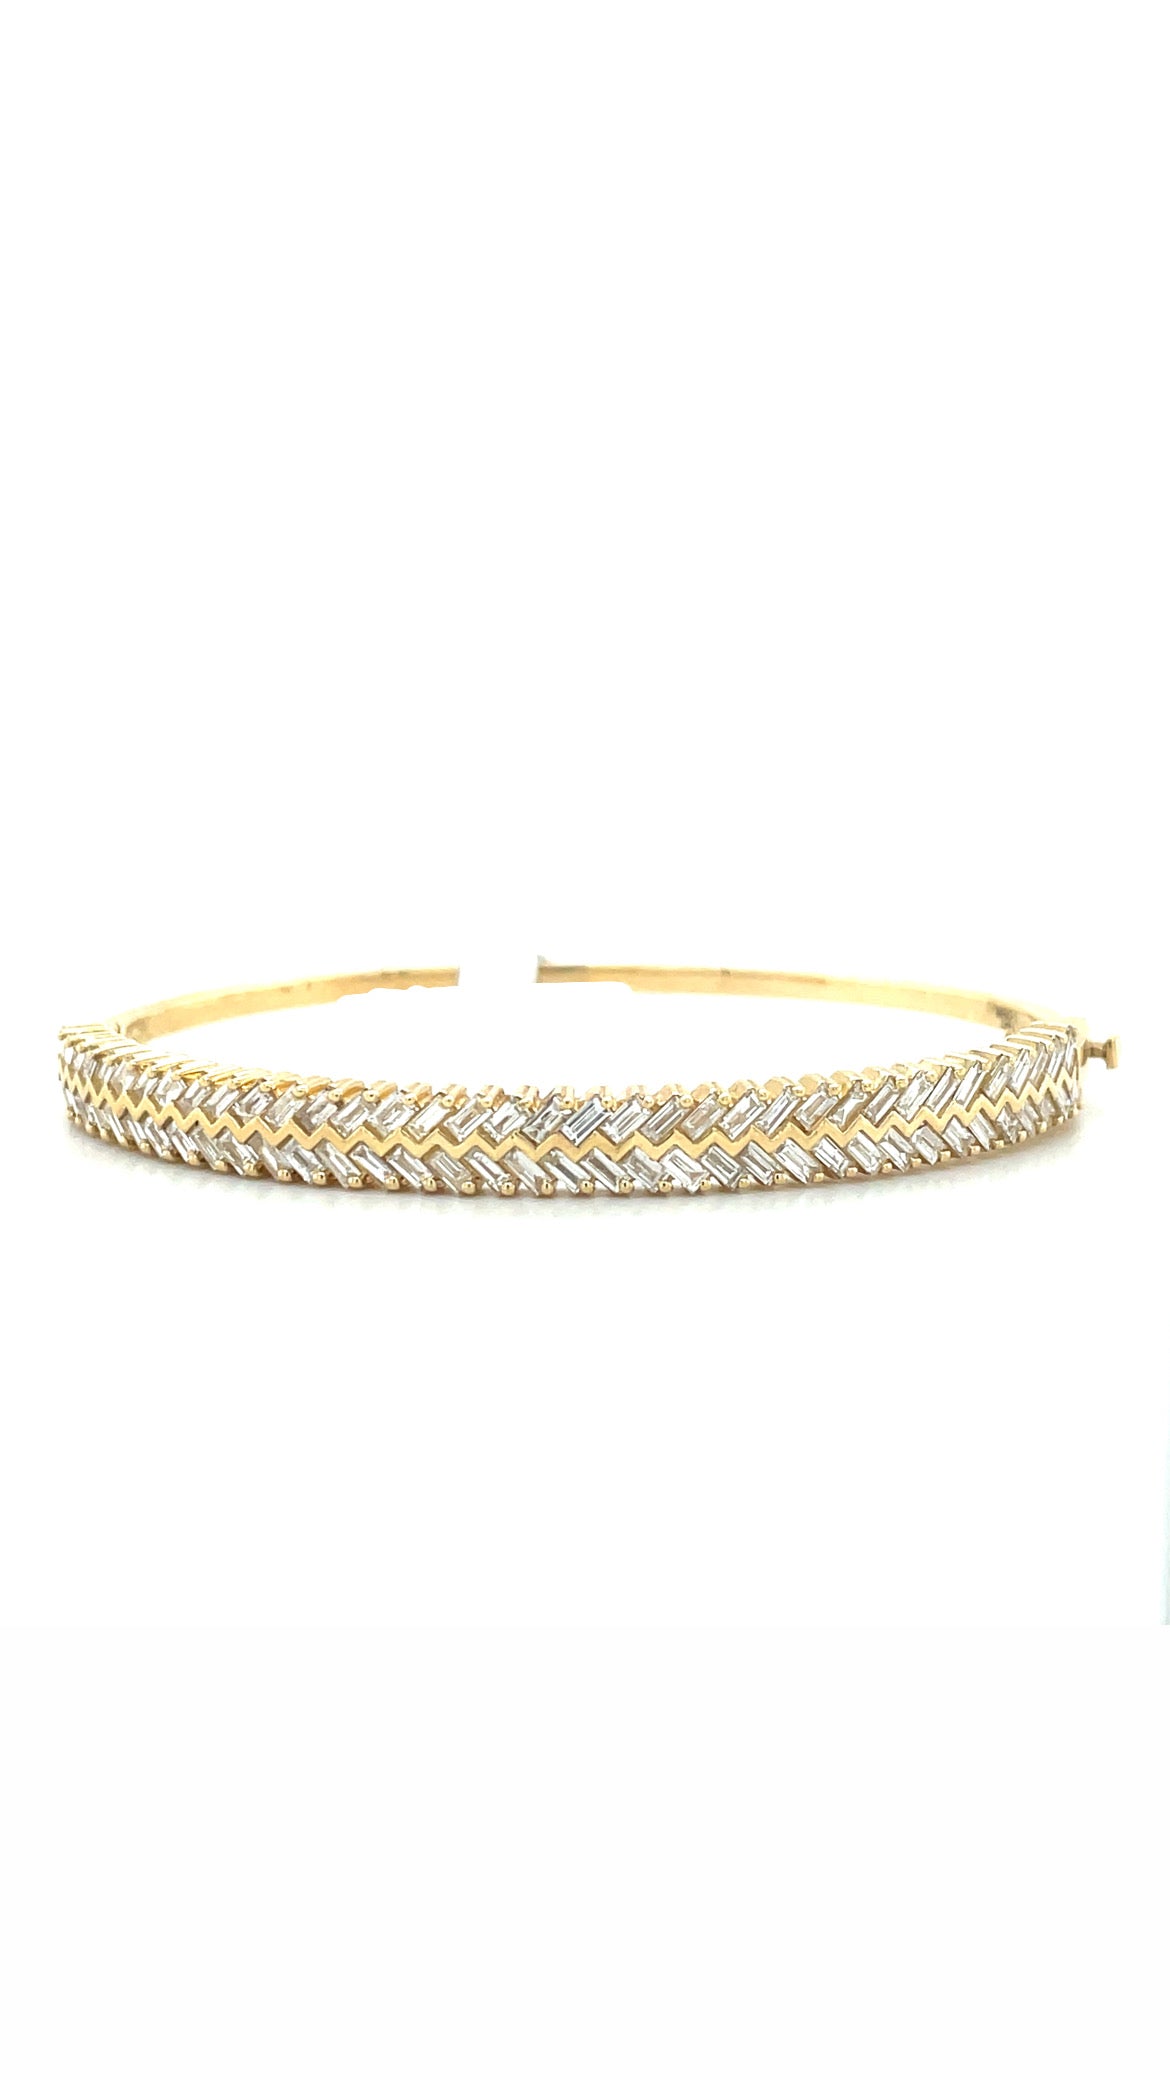 The Ivy Baguette Bangle